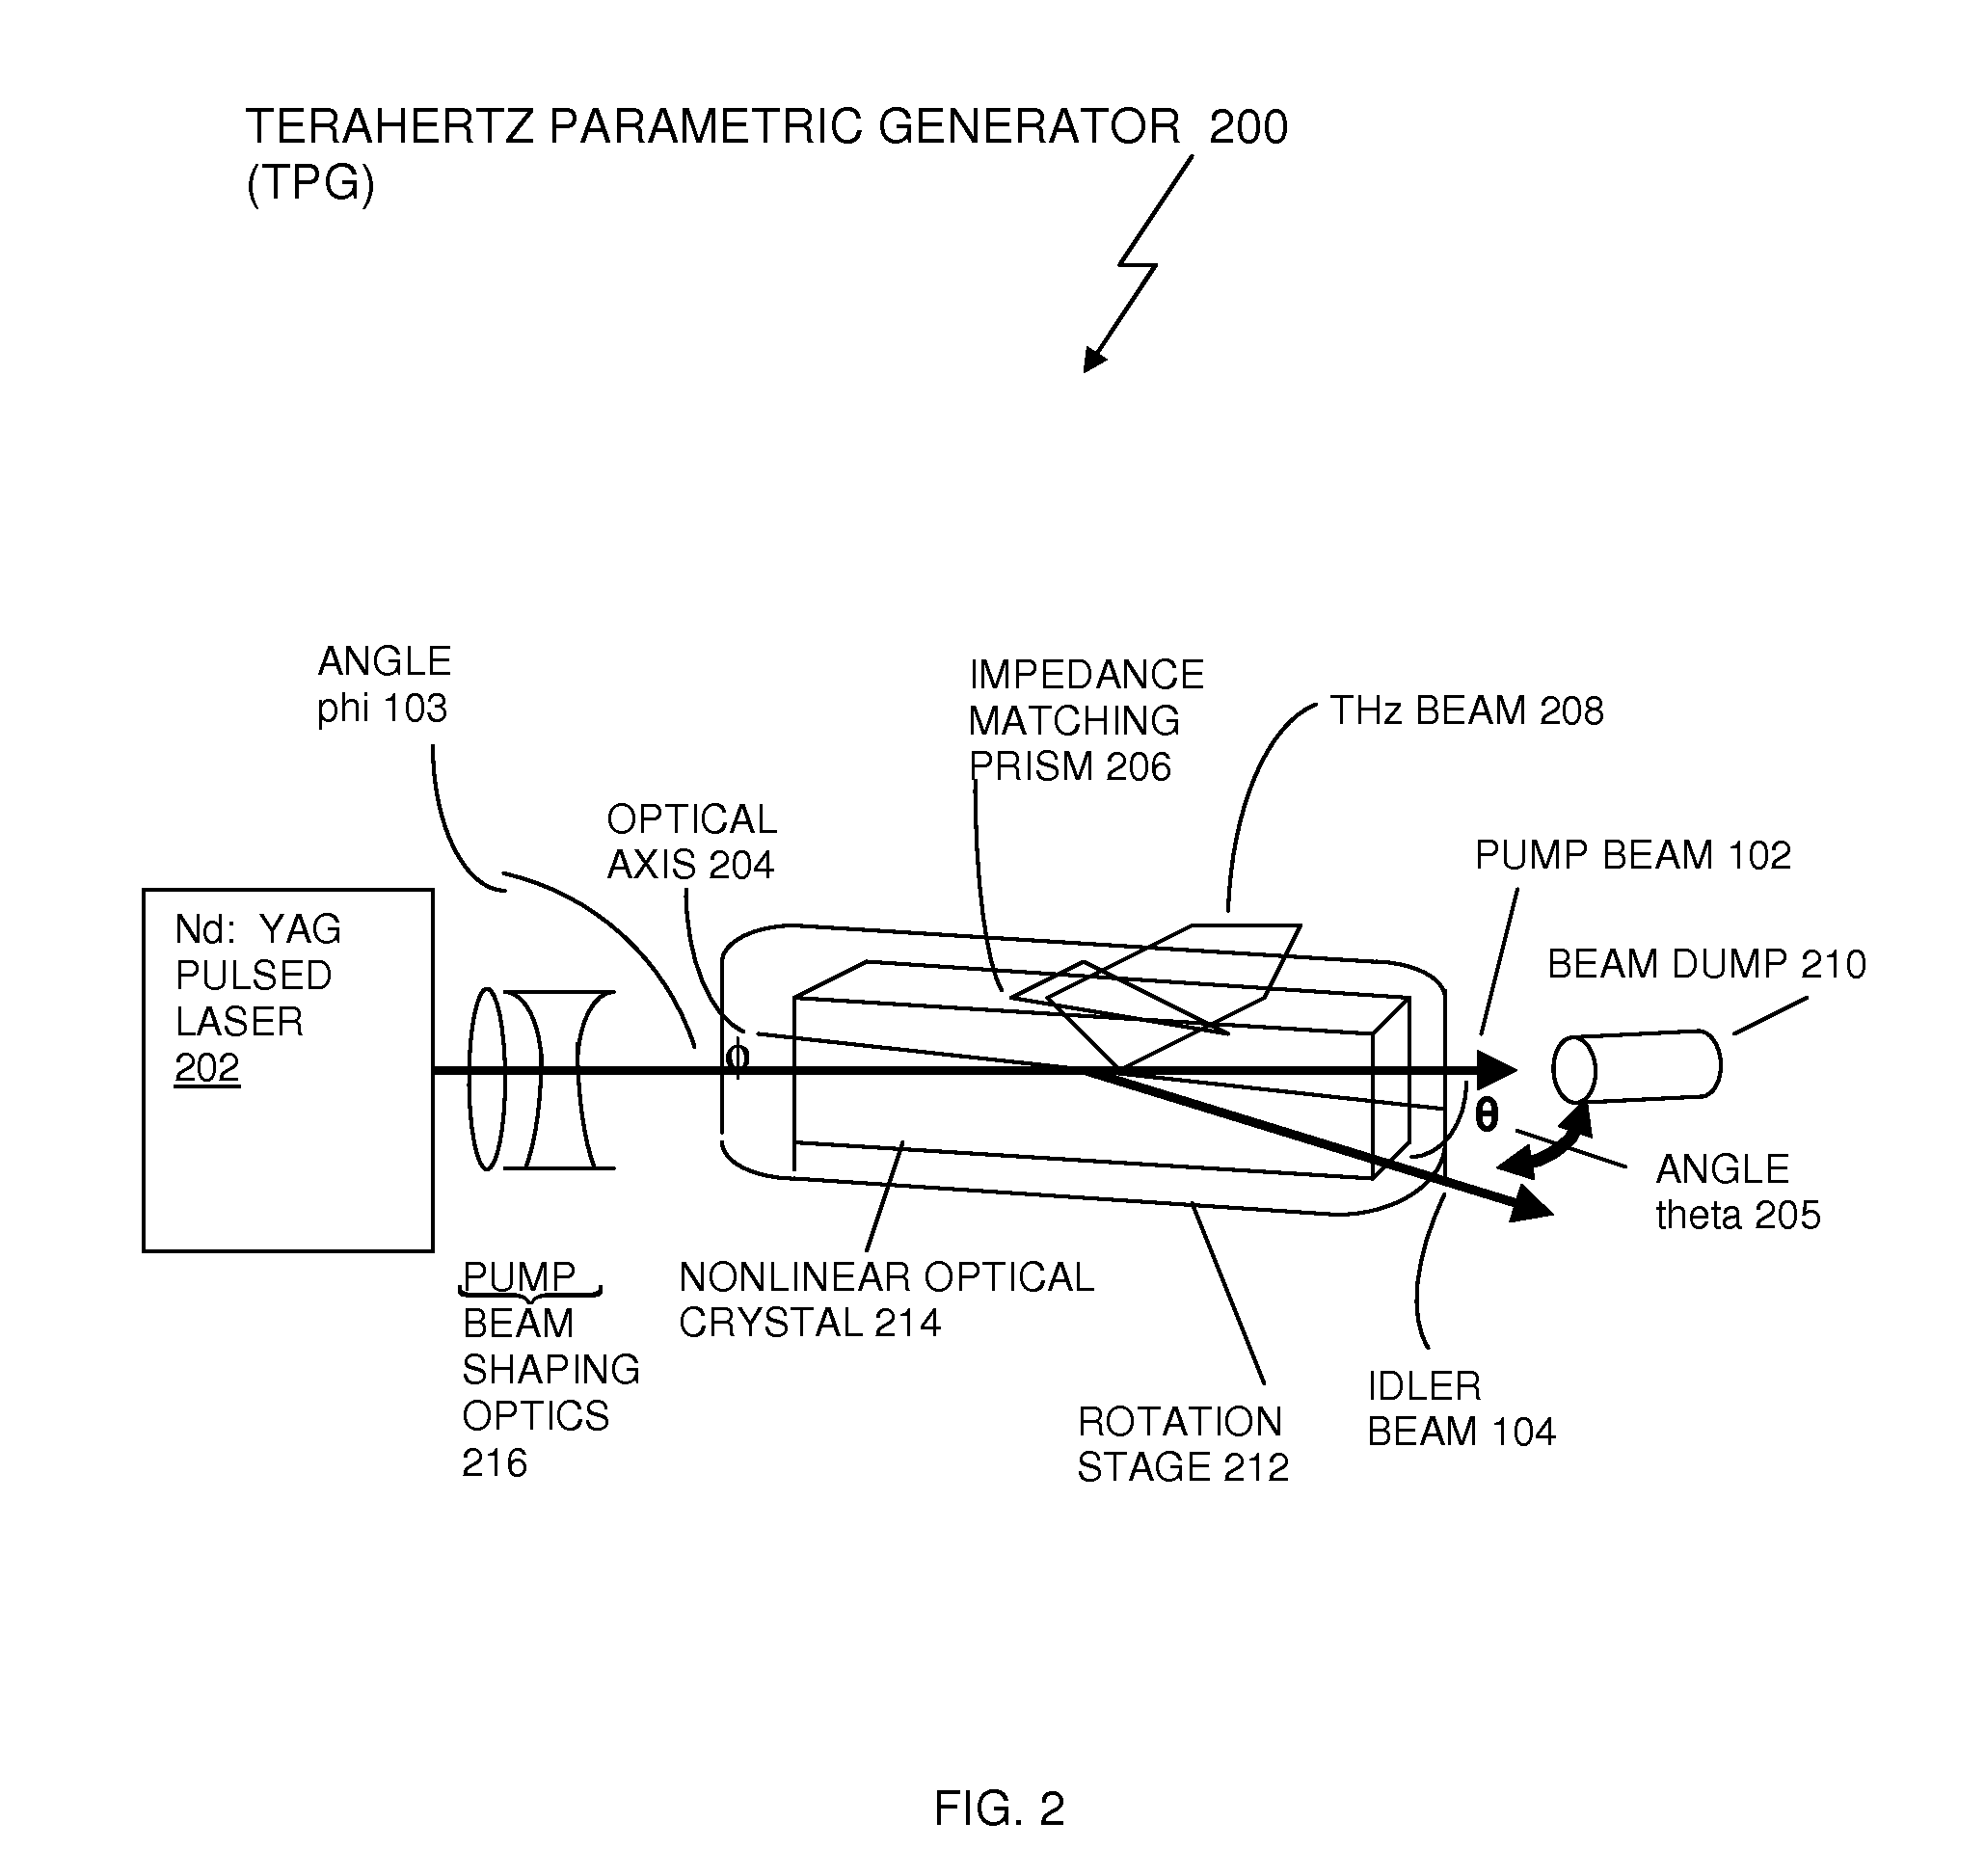 Recycling pump-beam method and system for a high-power terahertz parametric source